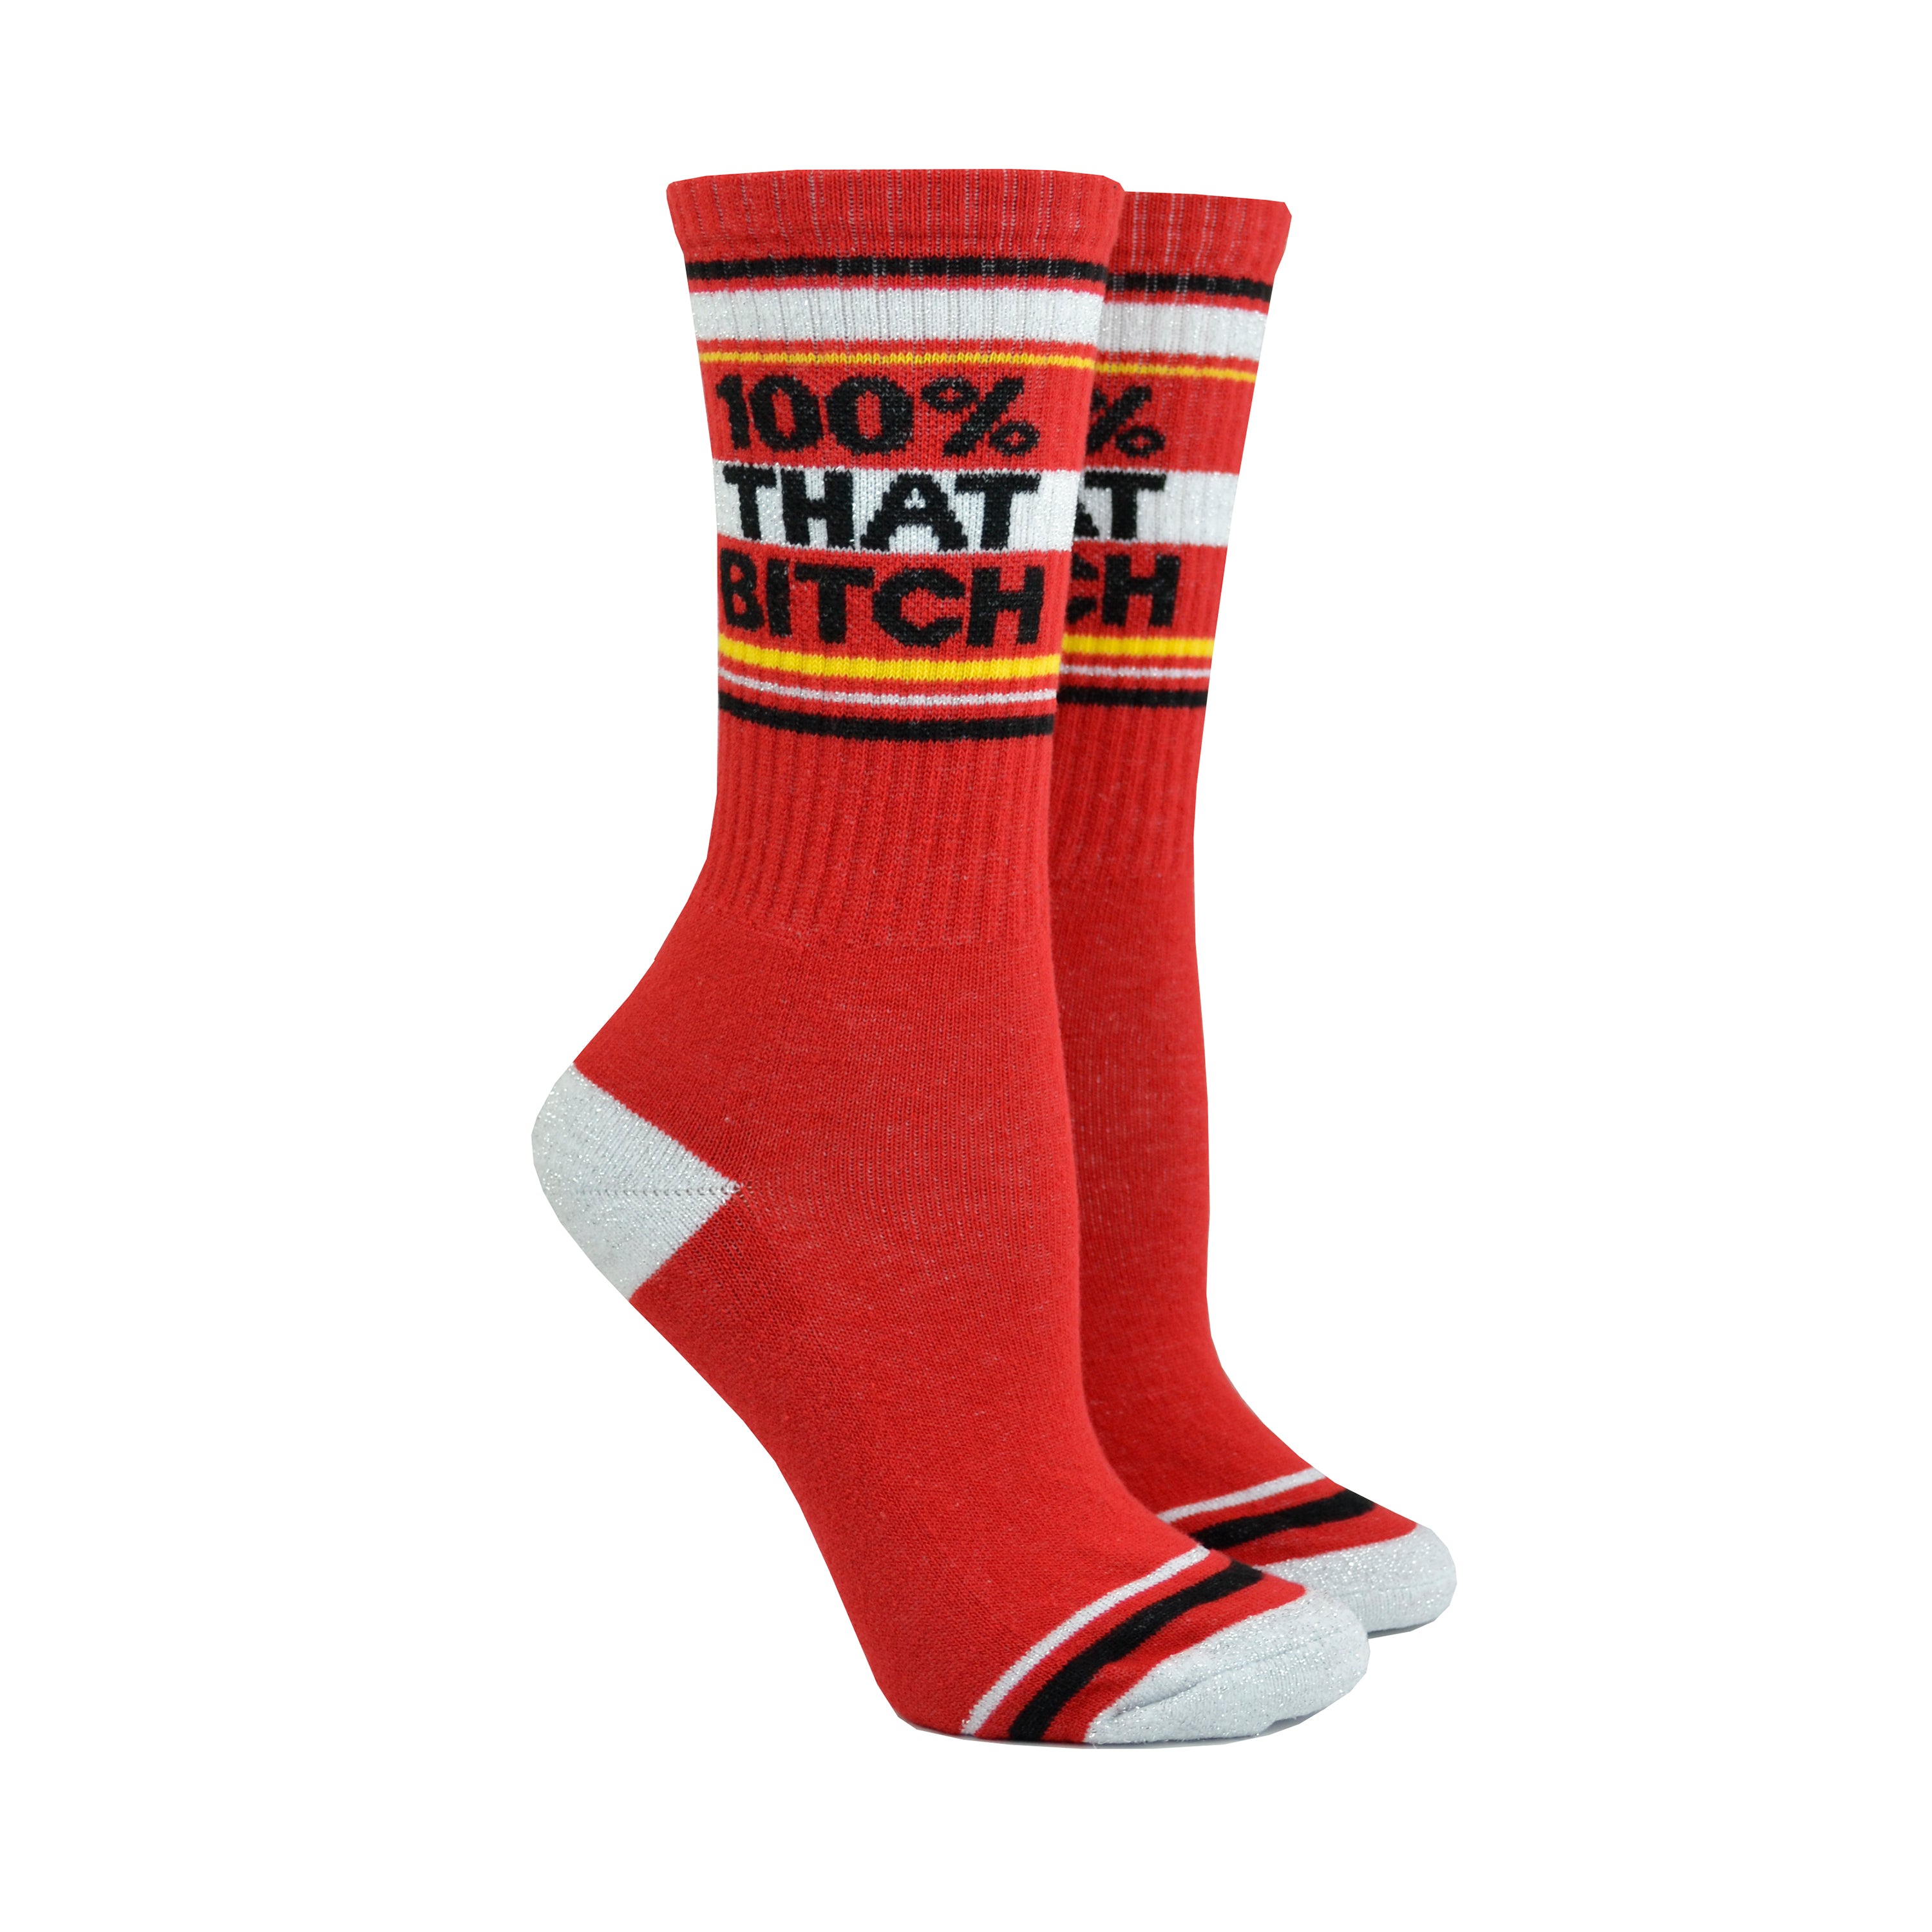 Shown on leg forms, a pair of cotton crew length unisex Gumball Poodle brand socks in red with a sparkly silver toe and heel. The leg of the sock features, black, sparkly silver, and yellow stripes with the phrase, 